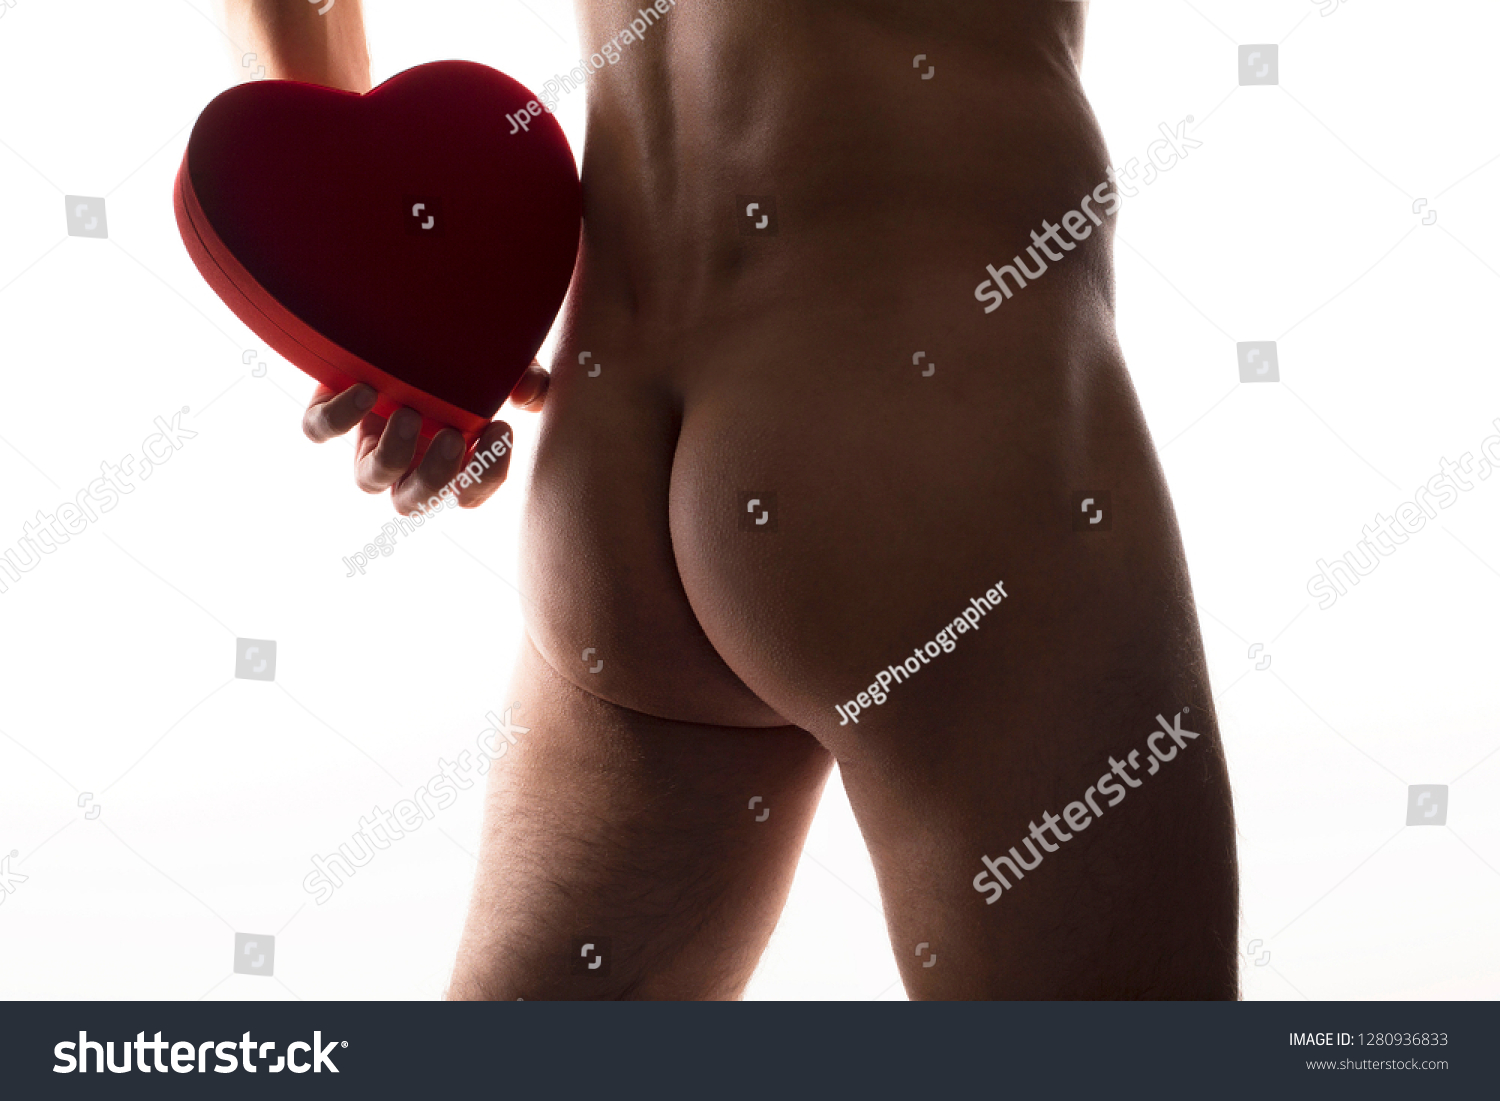 stock-photo-valentine-s-day-surprise-gift-naked-guy-with-heart-shaped-chocolate-box-behind-his-back-slim-fit-1280936833.jpg